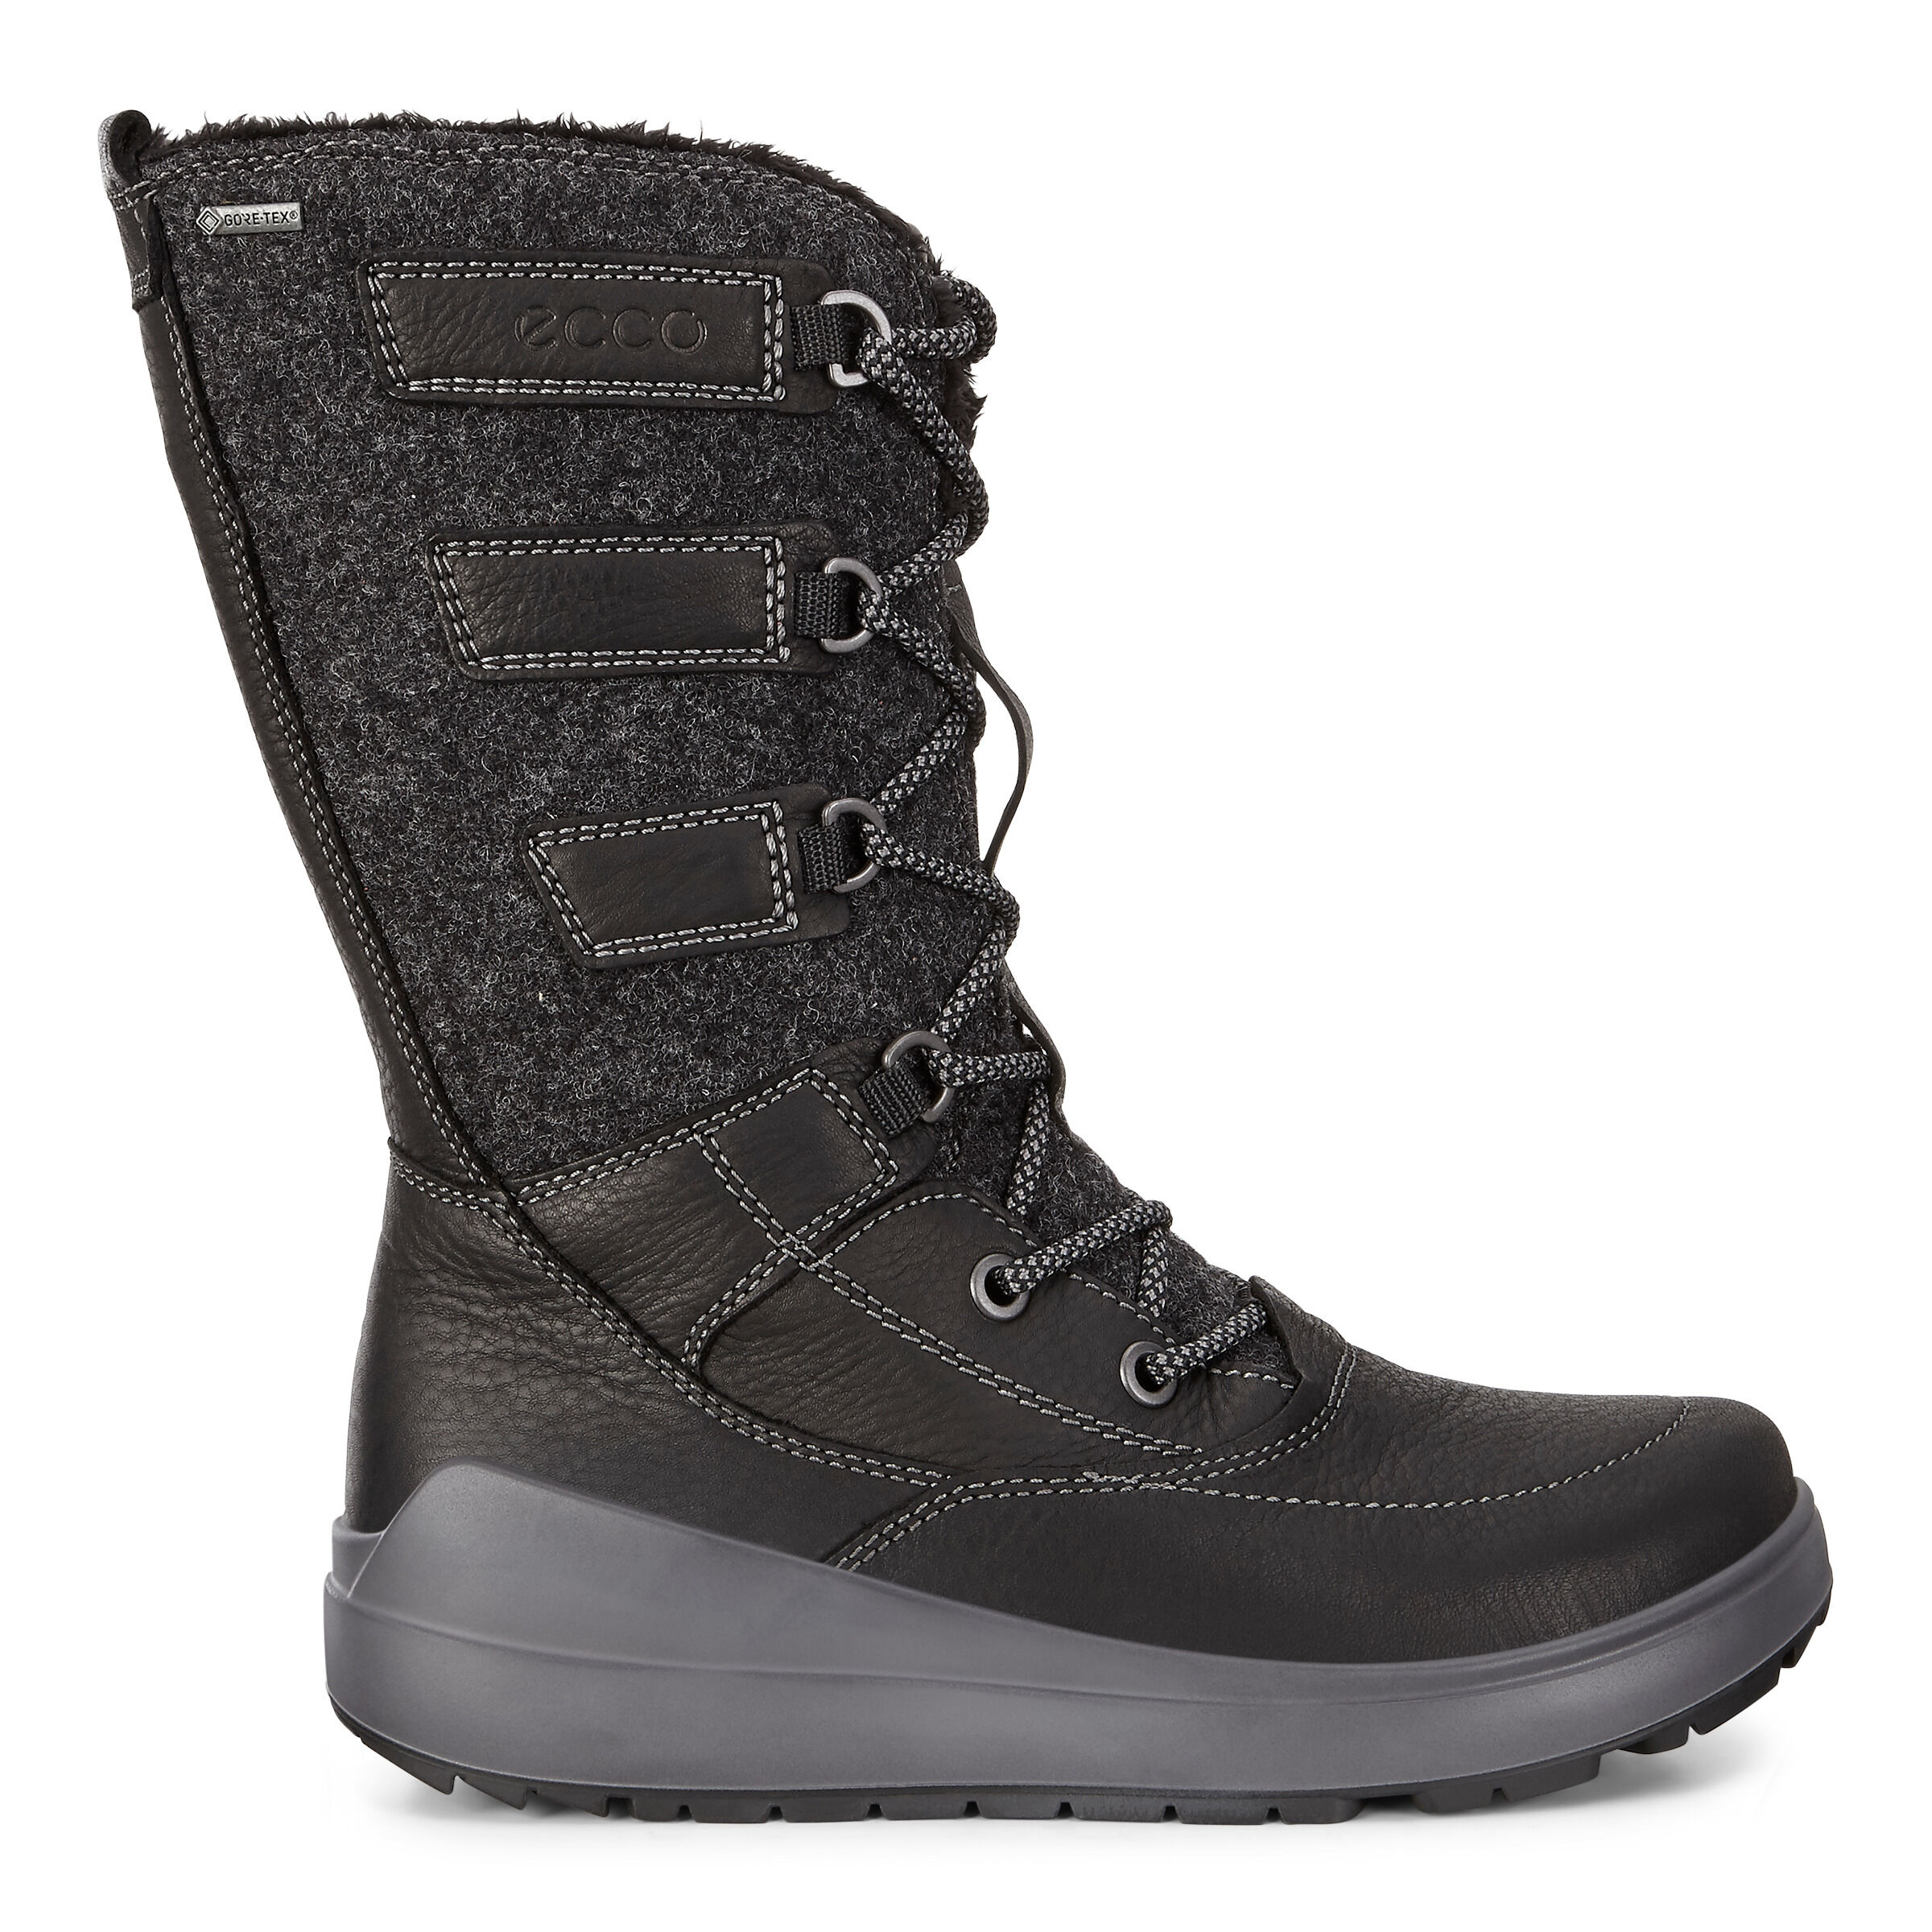 UPC 809704475608 product image for ECCO Womens Noyce GTX High Boots Size 11/11.5 Black | upcitemdb.com